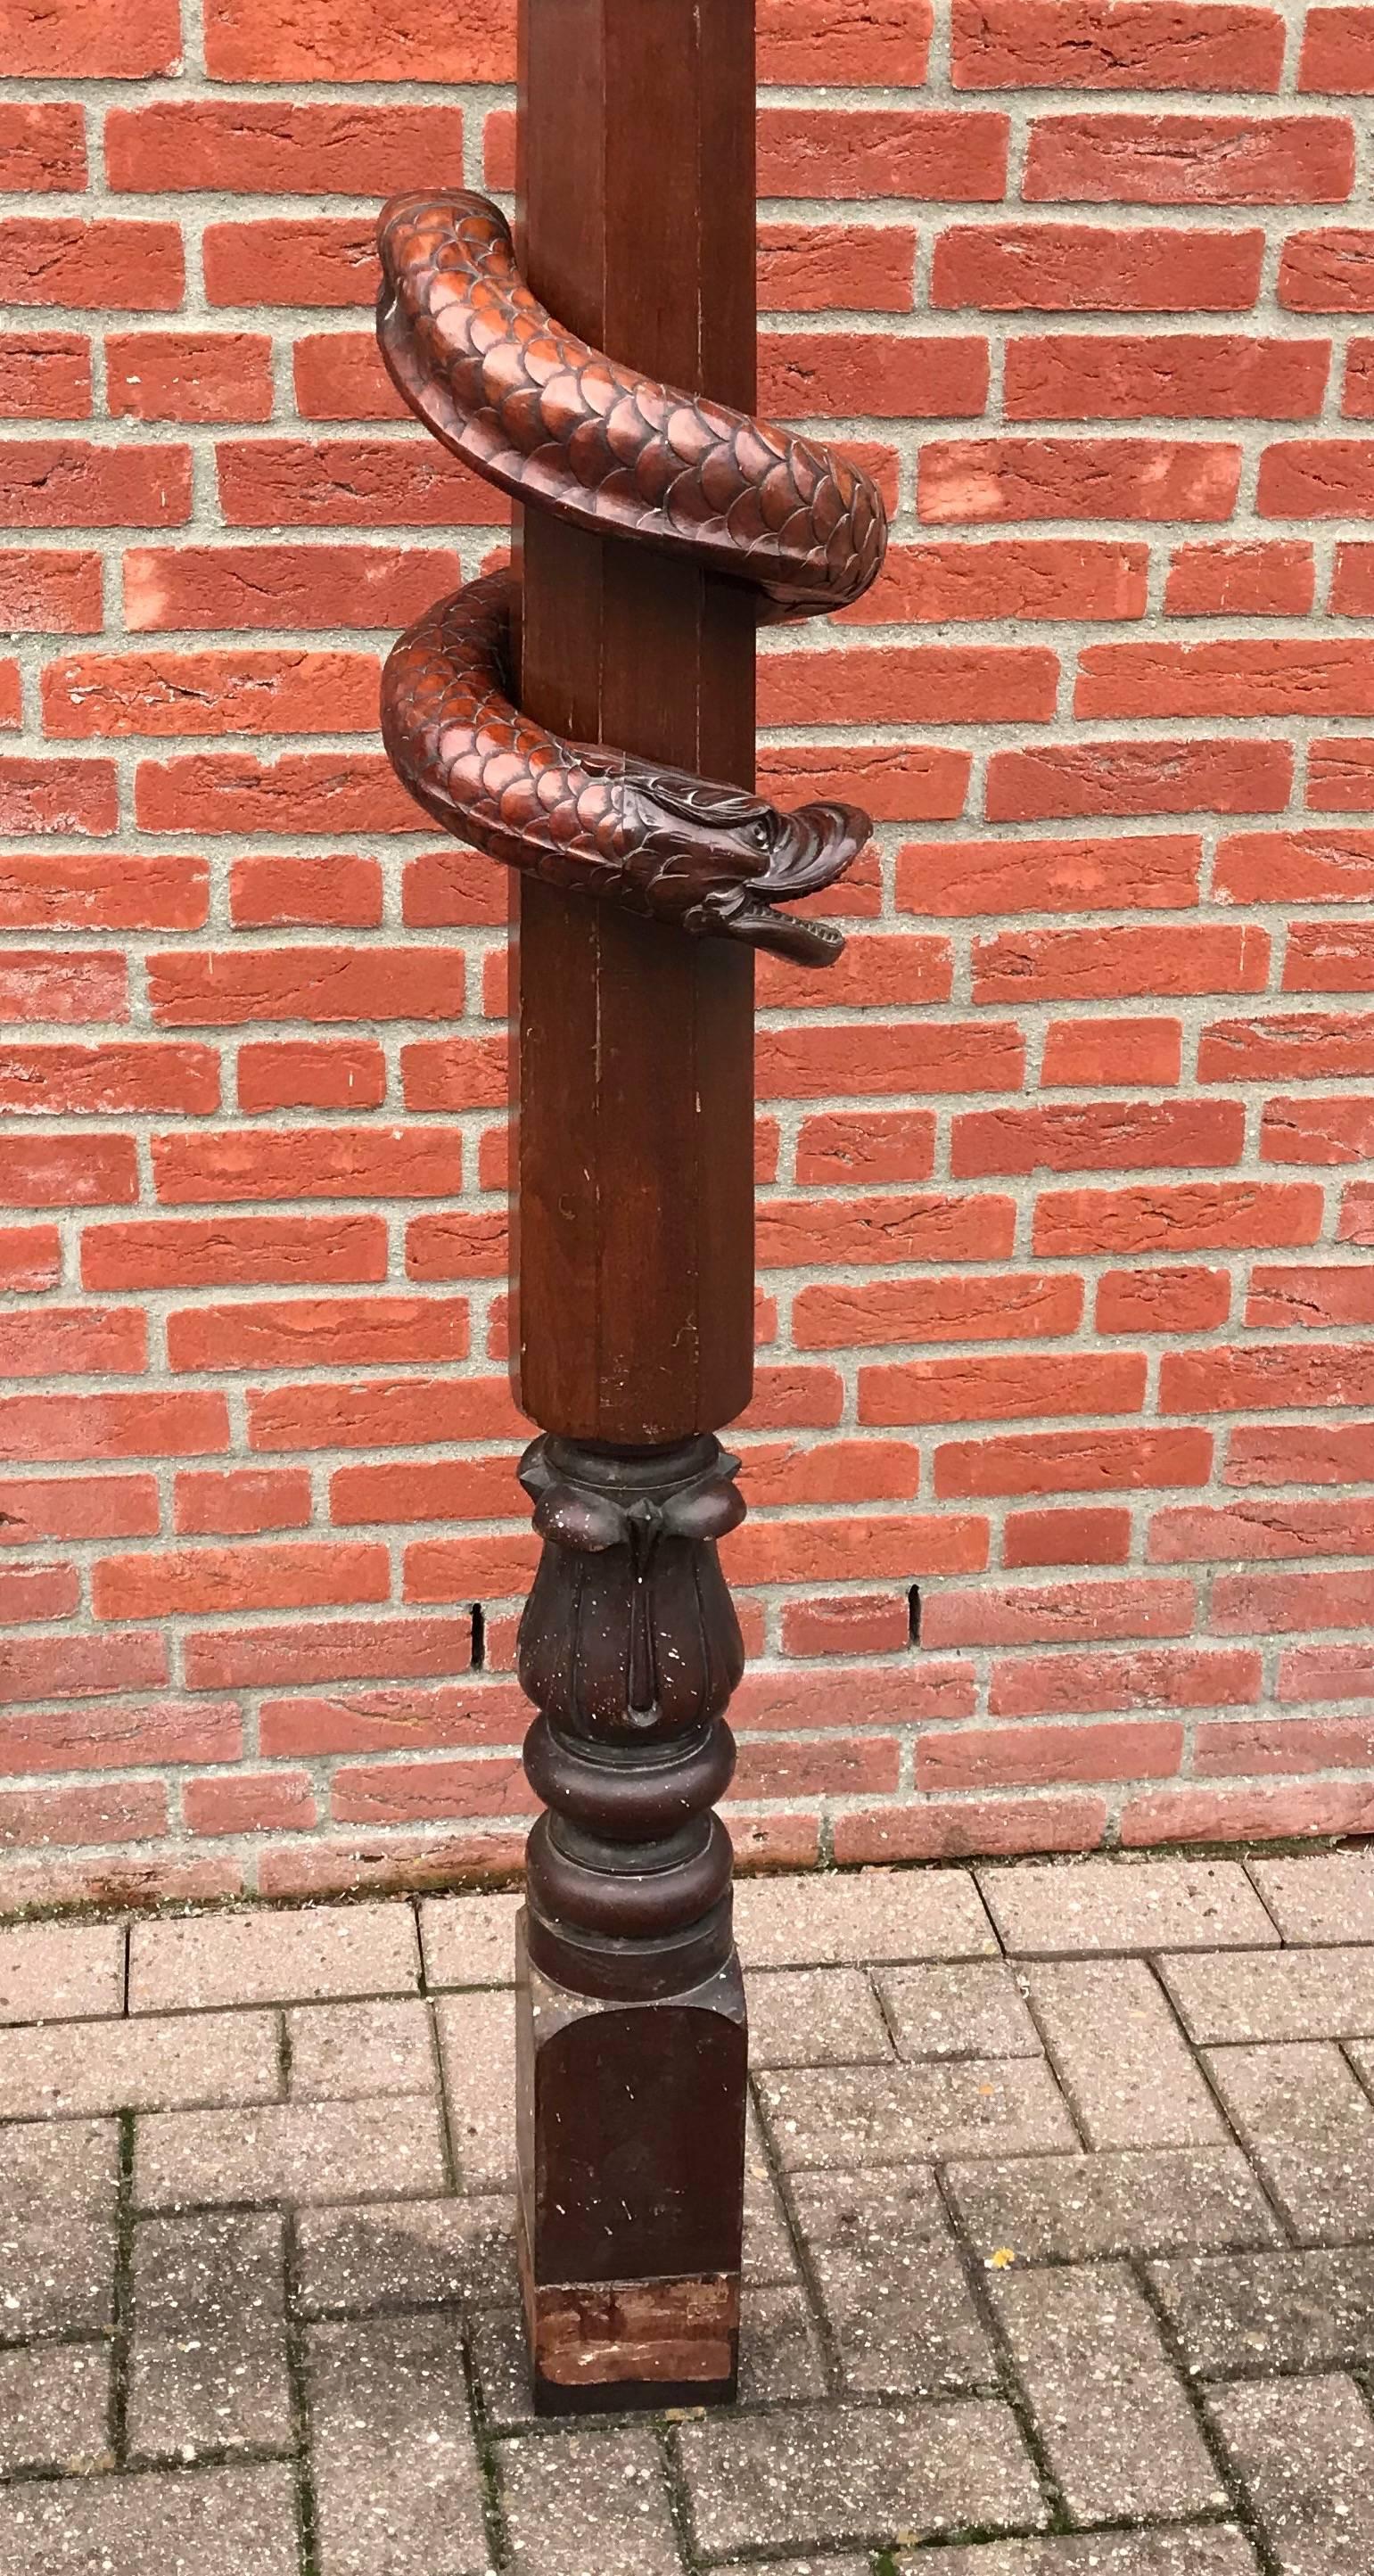 Mahogany Stair Rail Newel Post with Carved Dragon Head and Snake Sculpture 1